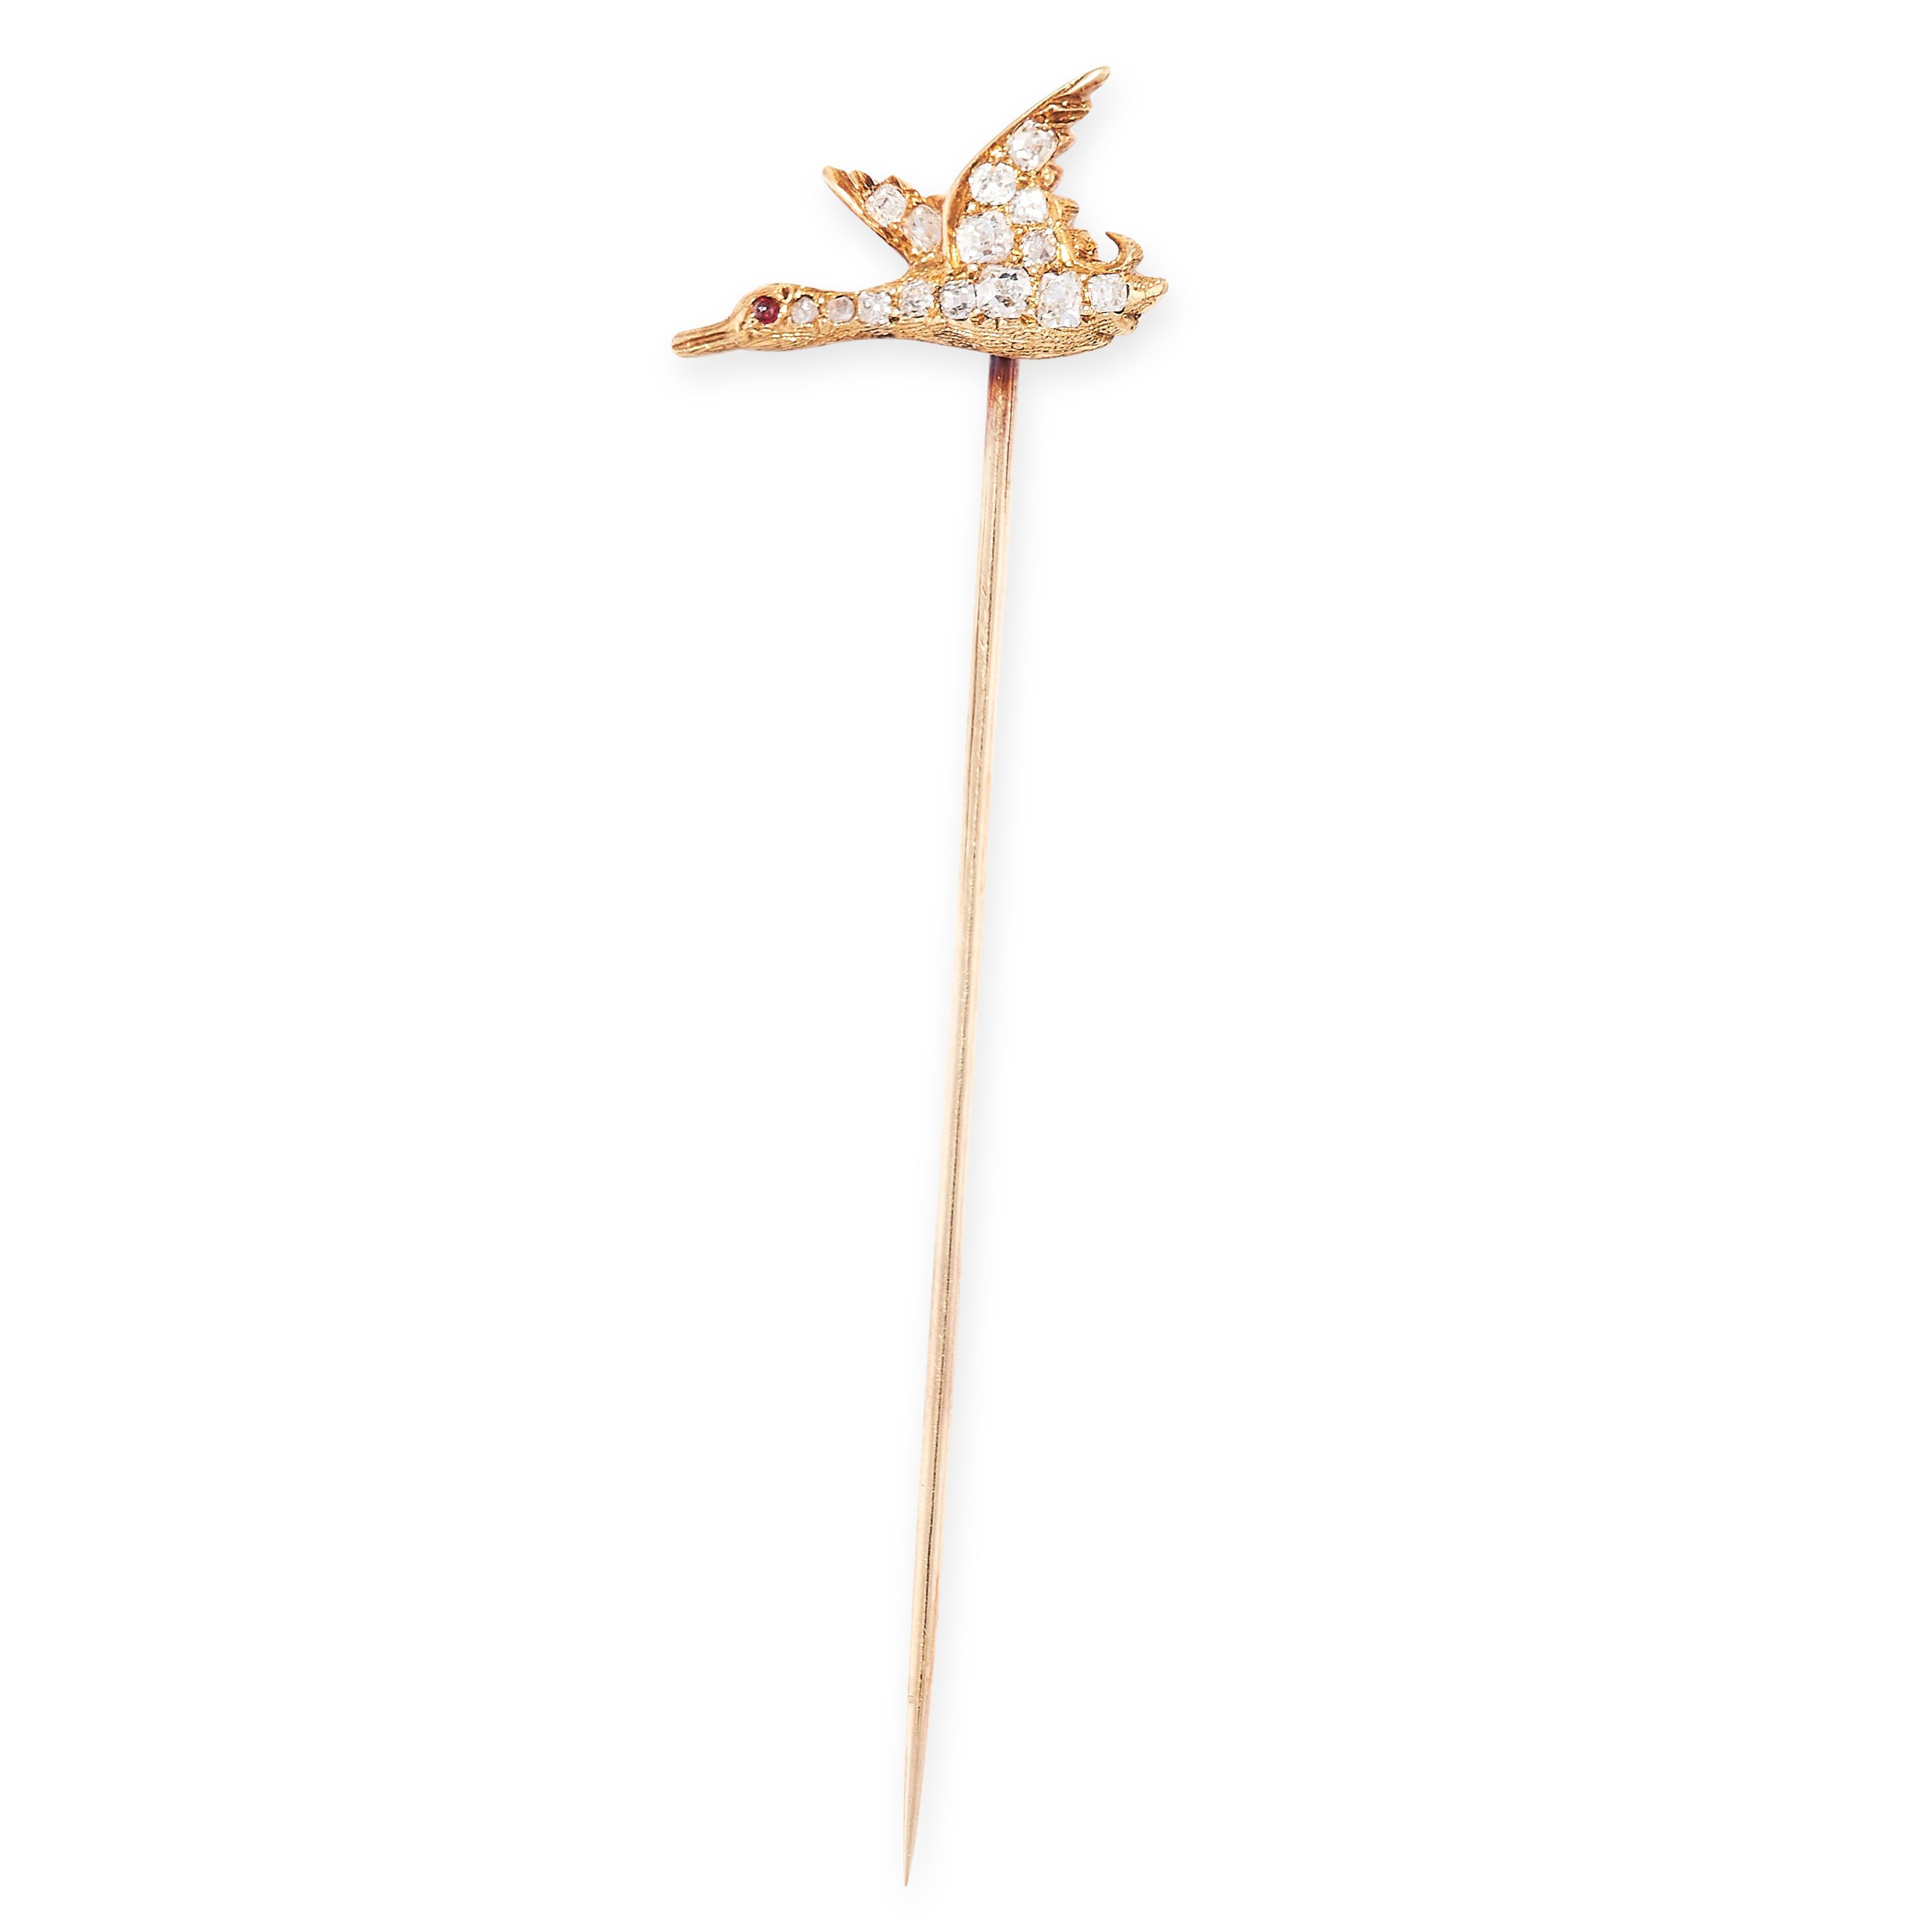 AN ANTIQUE DIAMOND AND RUBY STICK PIN, LATE 19TH CENTURY designed as a duck in flight, set with